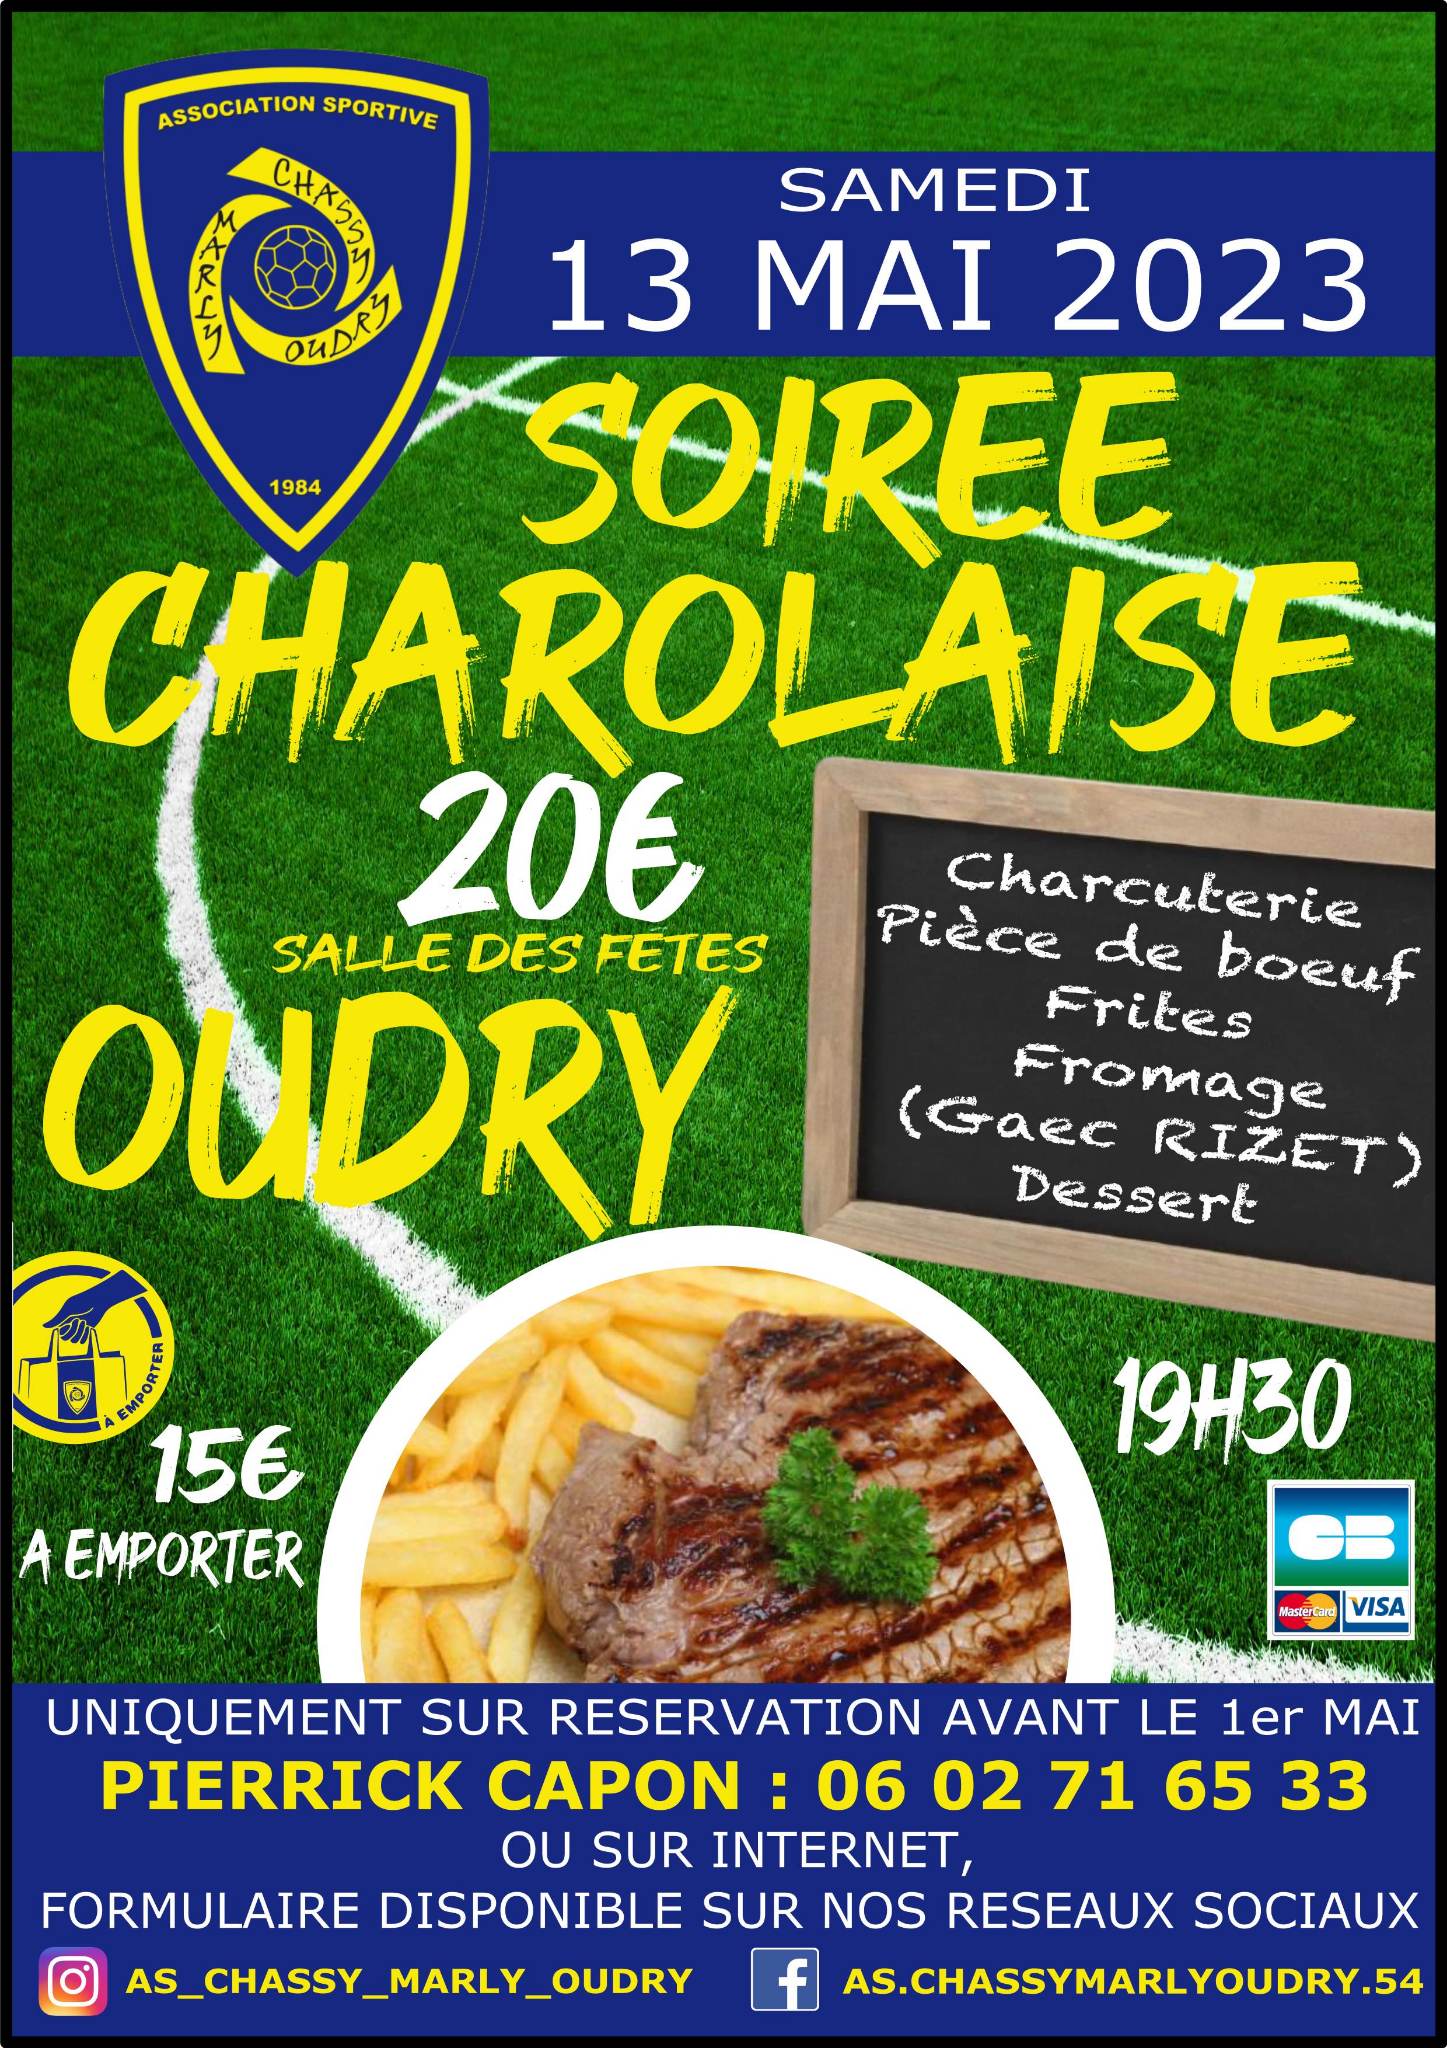 Soirée Charolaise de l'AS Chassy-Marly-Oudry